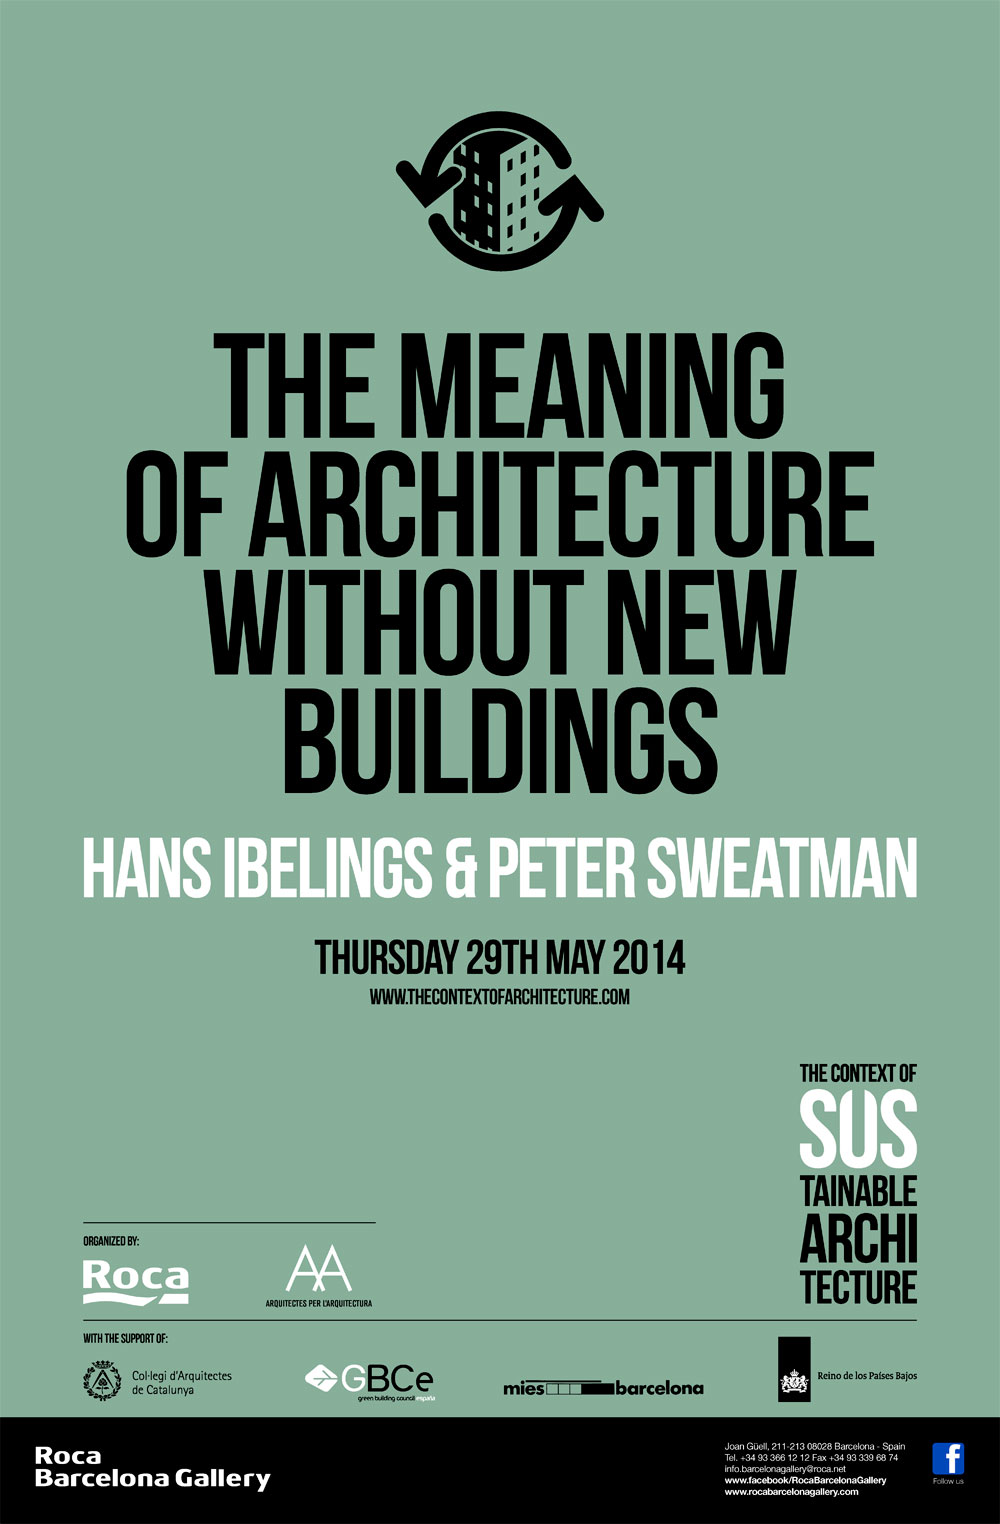 The meaning of architecture without new buildings | Hans Ibelings & Peter Sweatman | The Context of Sustainable Architecture